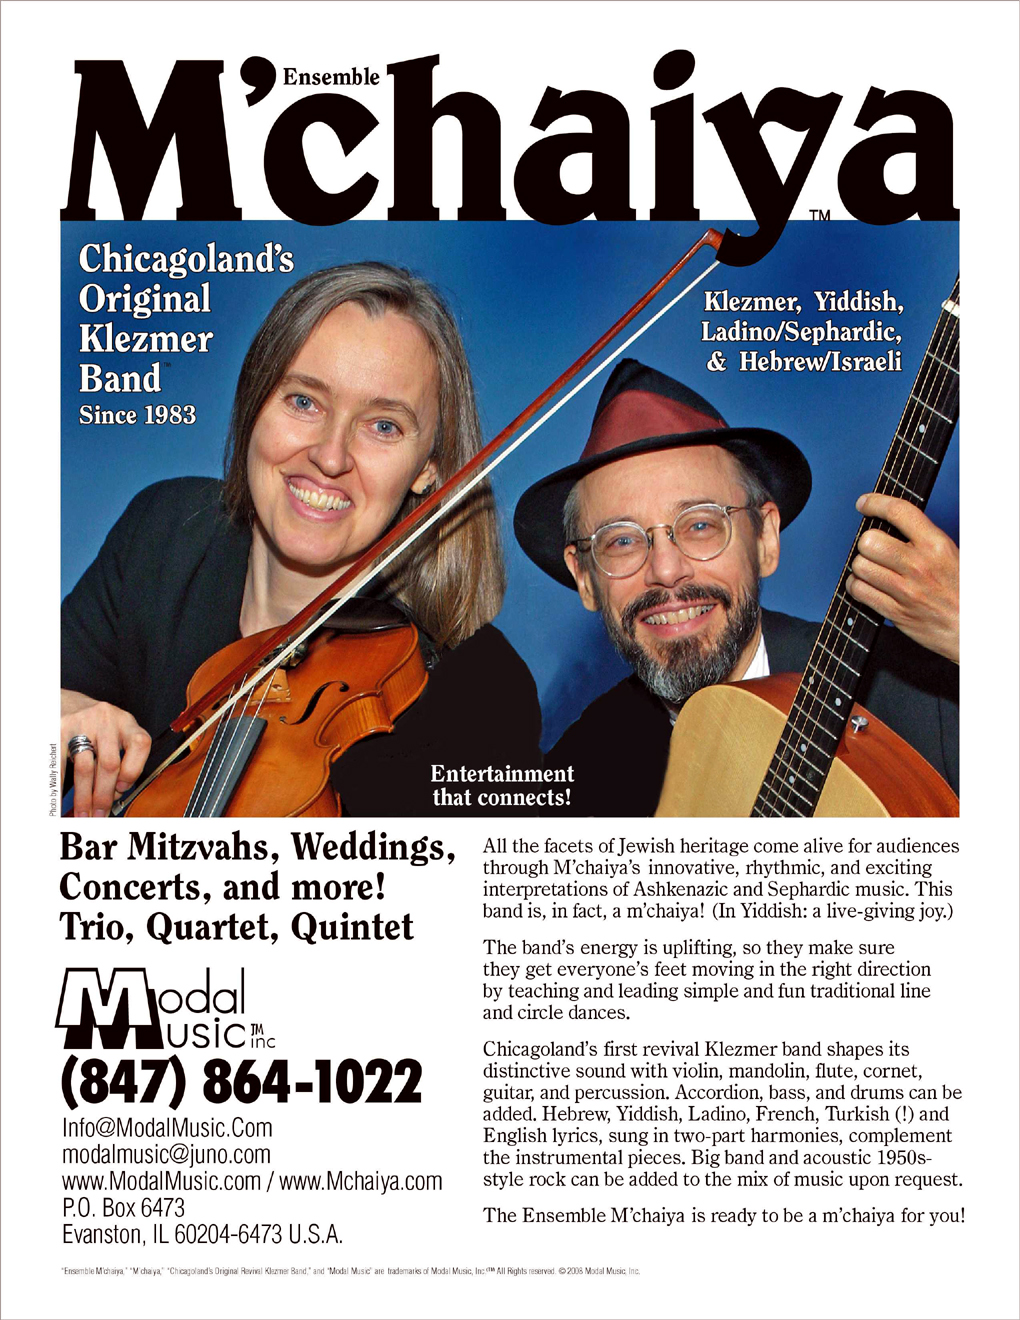 Ensemble M’chaiya One Sheet Brochure. Click to download printable PDF file. Copyright 2016, Modal Music, Inc. (tm). All rights reserved.